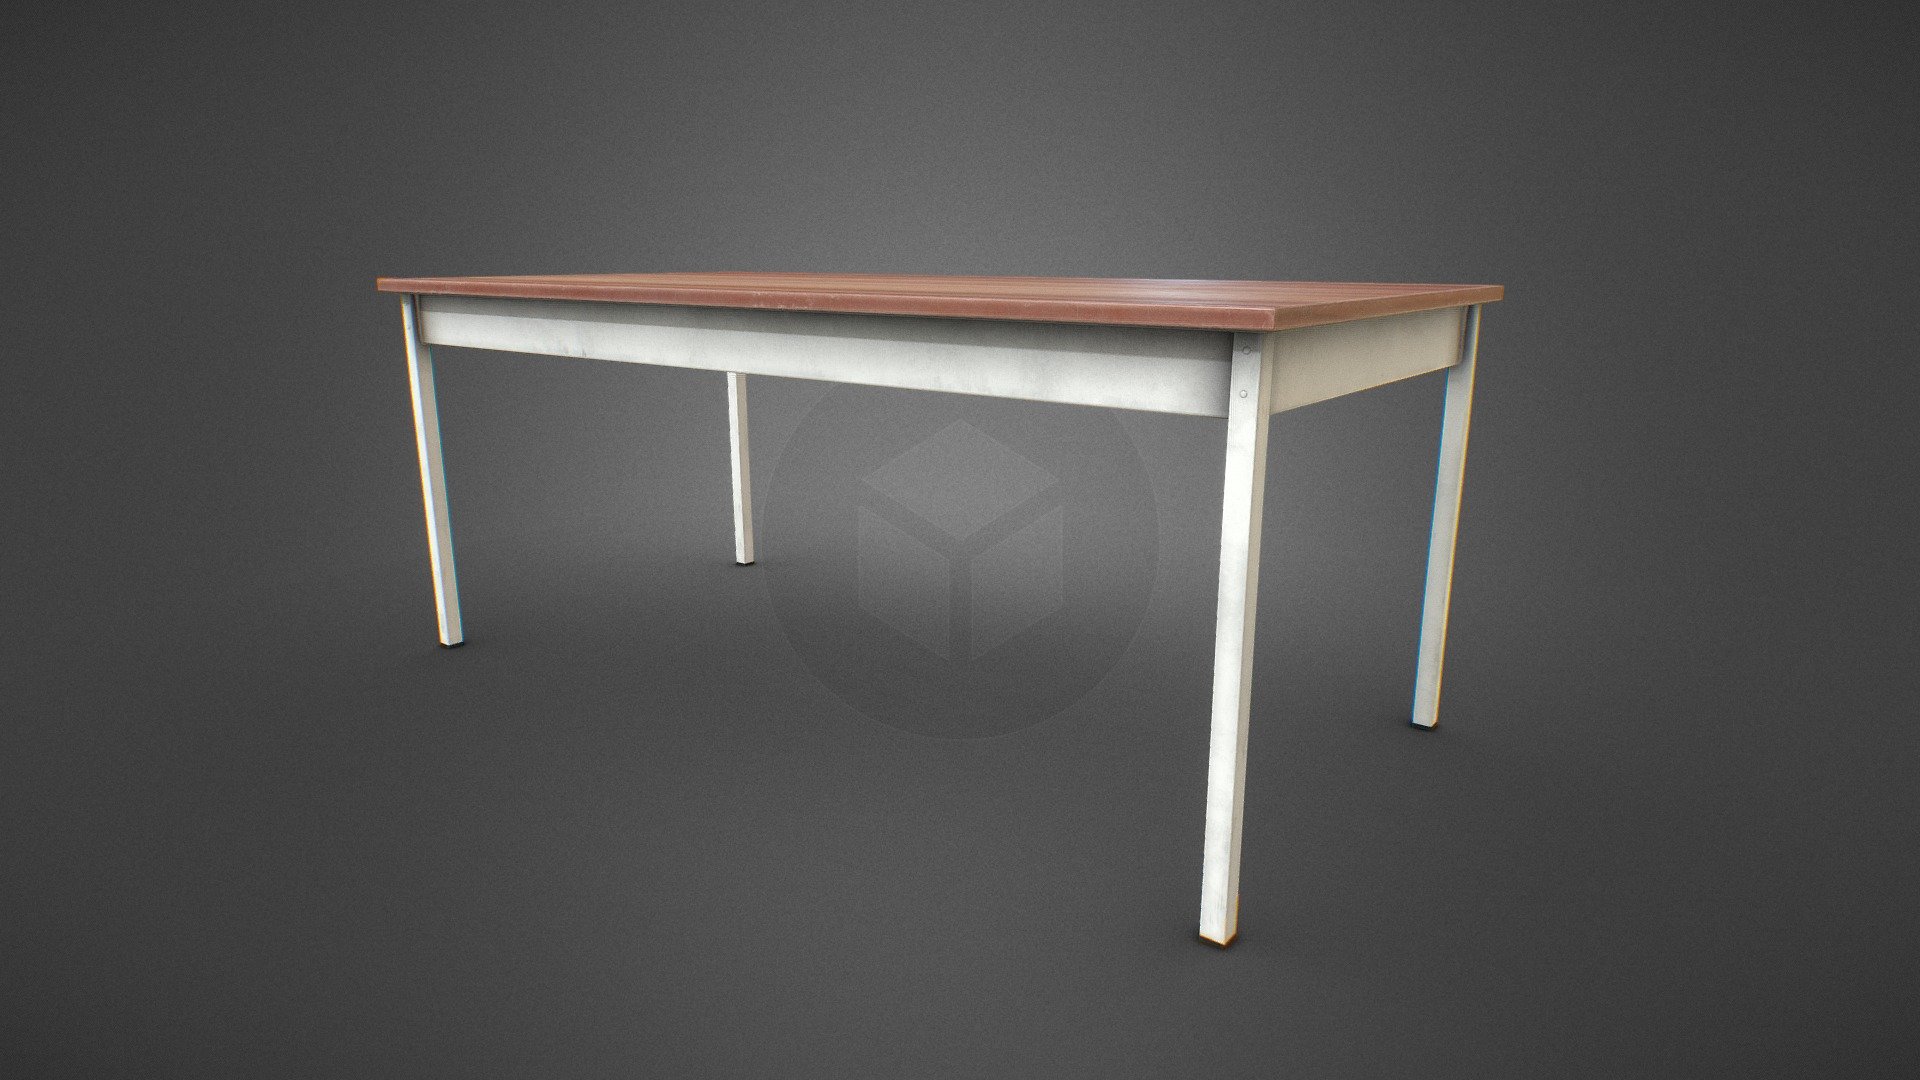 High poly model of a modern table.

Formats included : .FBX .OBJ

Included 1*UV 4096x4096 (baseColor - metallic - normal - roughness) 3d model